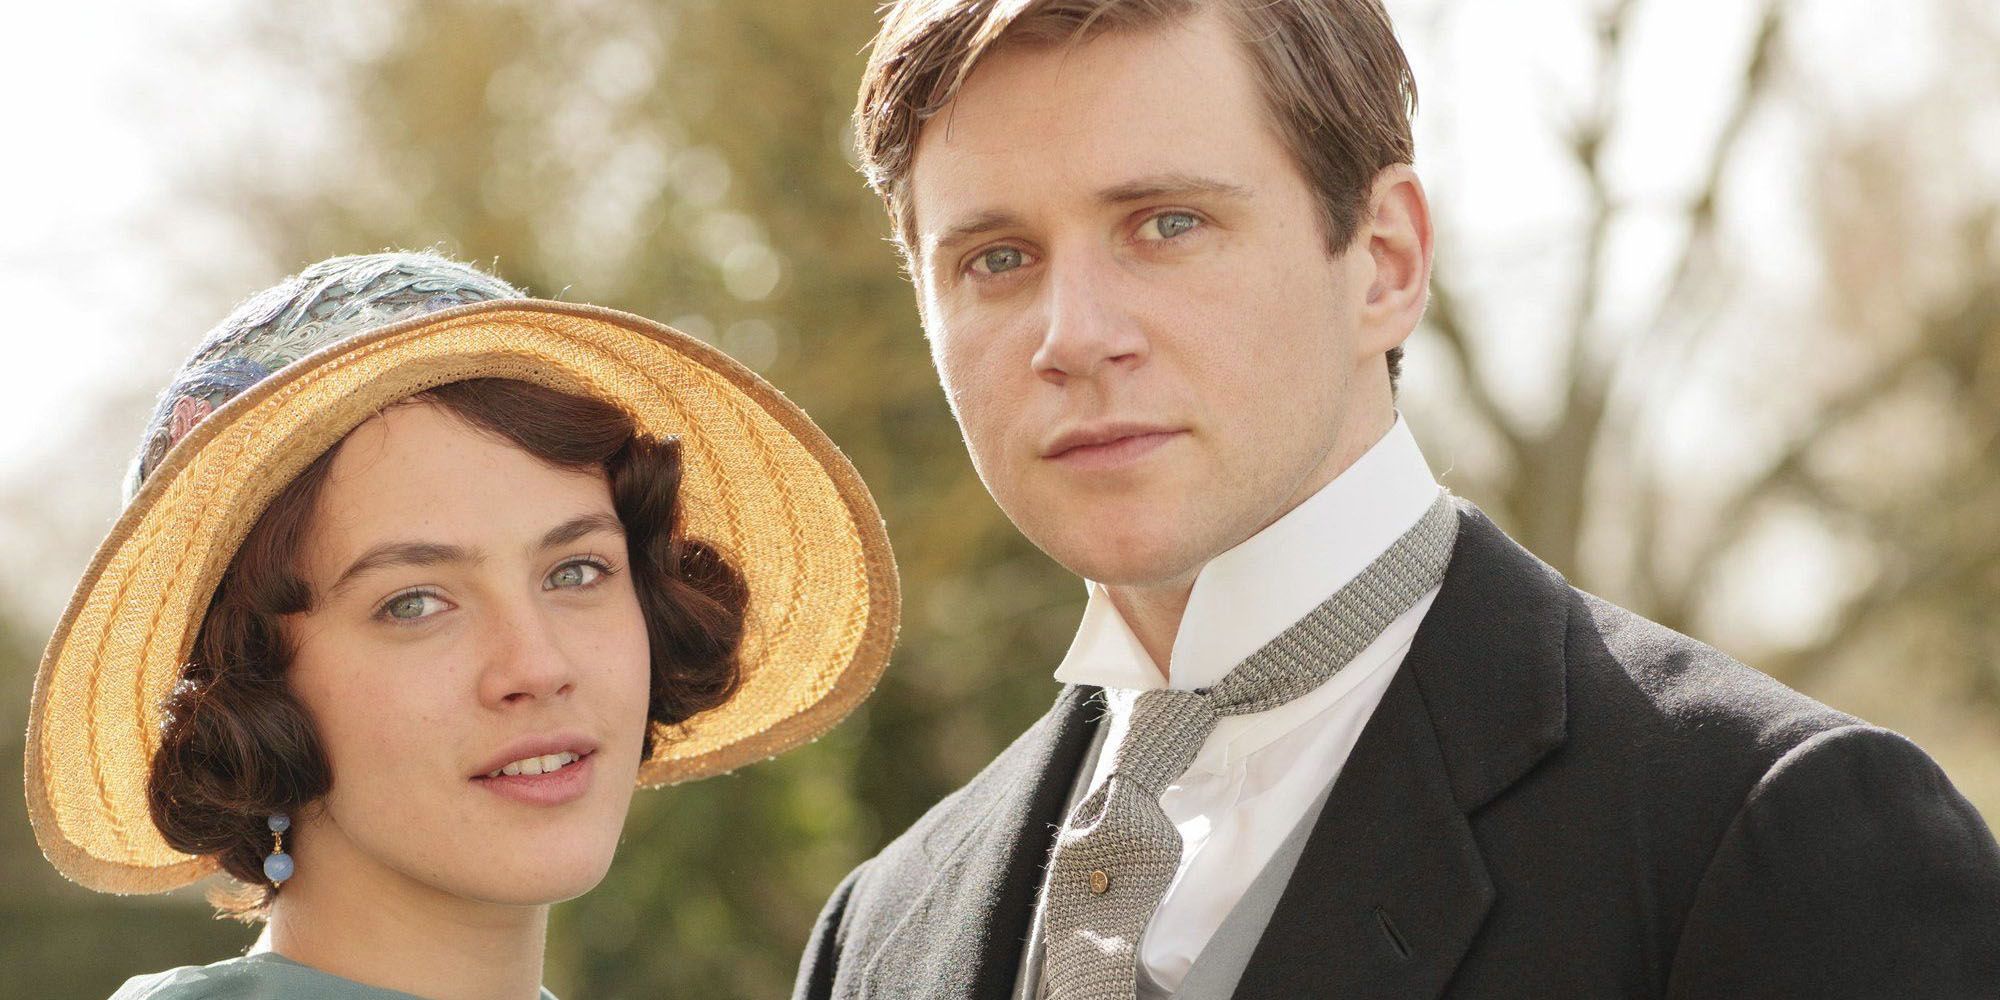 Downton Abbey Sybil and Tom